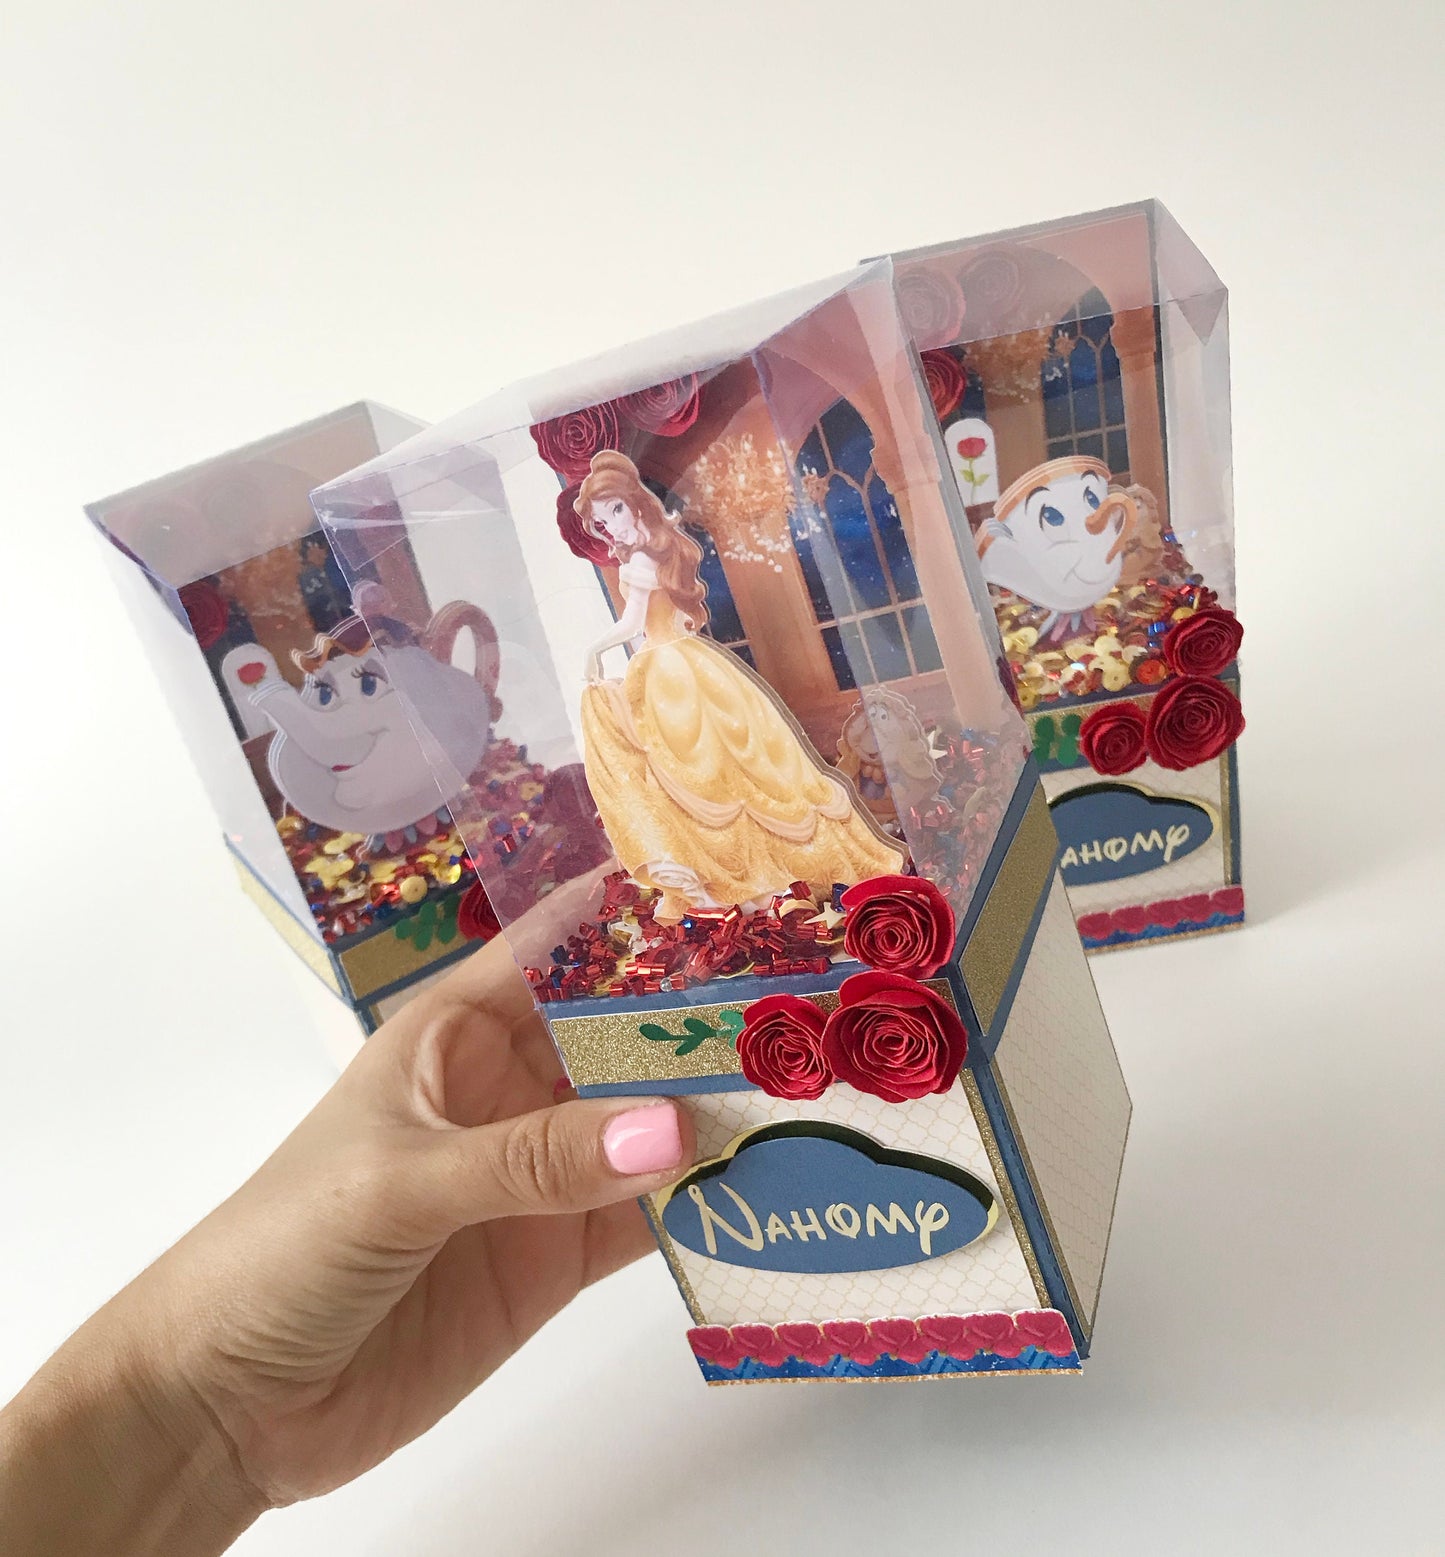 Beauty and the beast party favors